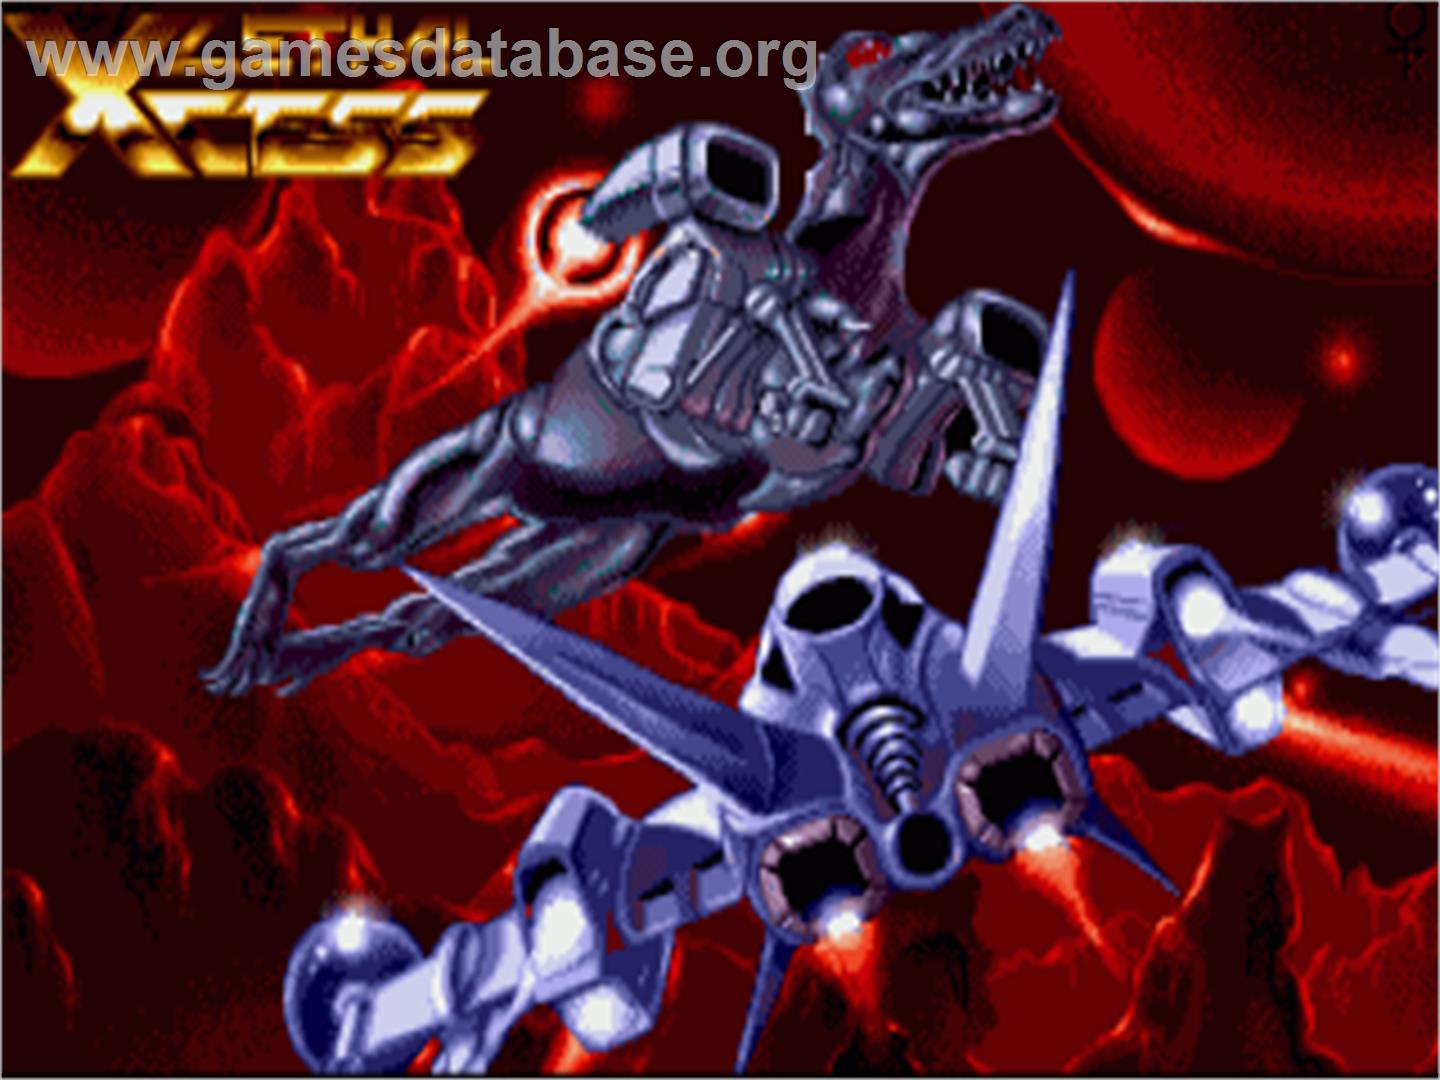 Lethal Xcess: Wings of Death 2 - Commodore Amiga - Artwork - Title Screen